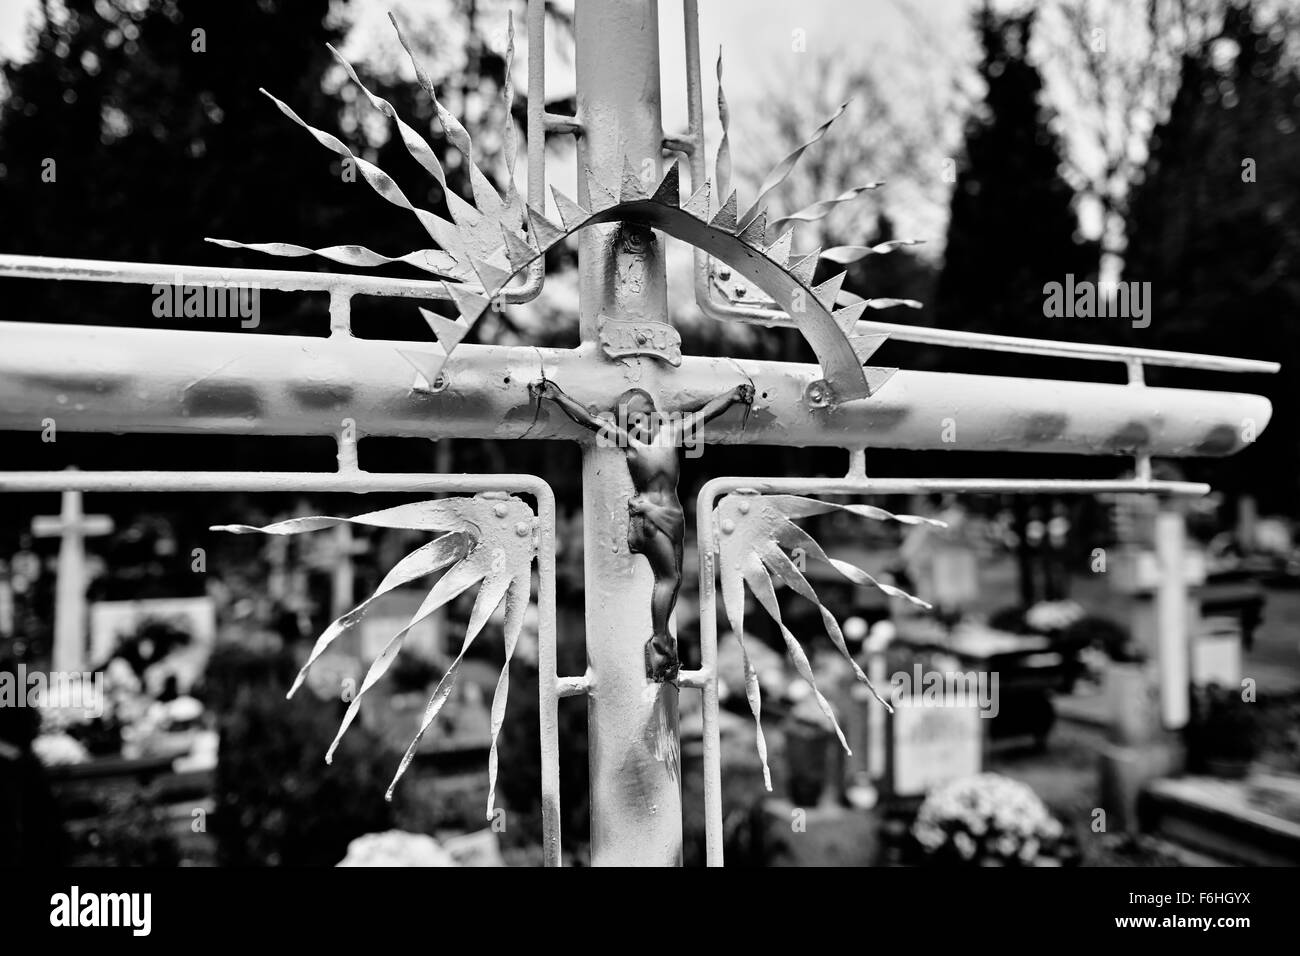 Catholic Religious Symbols On The Catholic Cemeteries In Poland Artistic Look In Black And